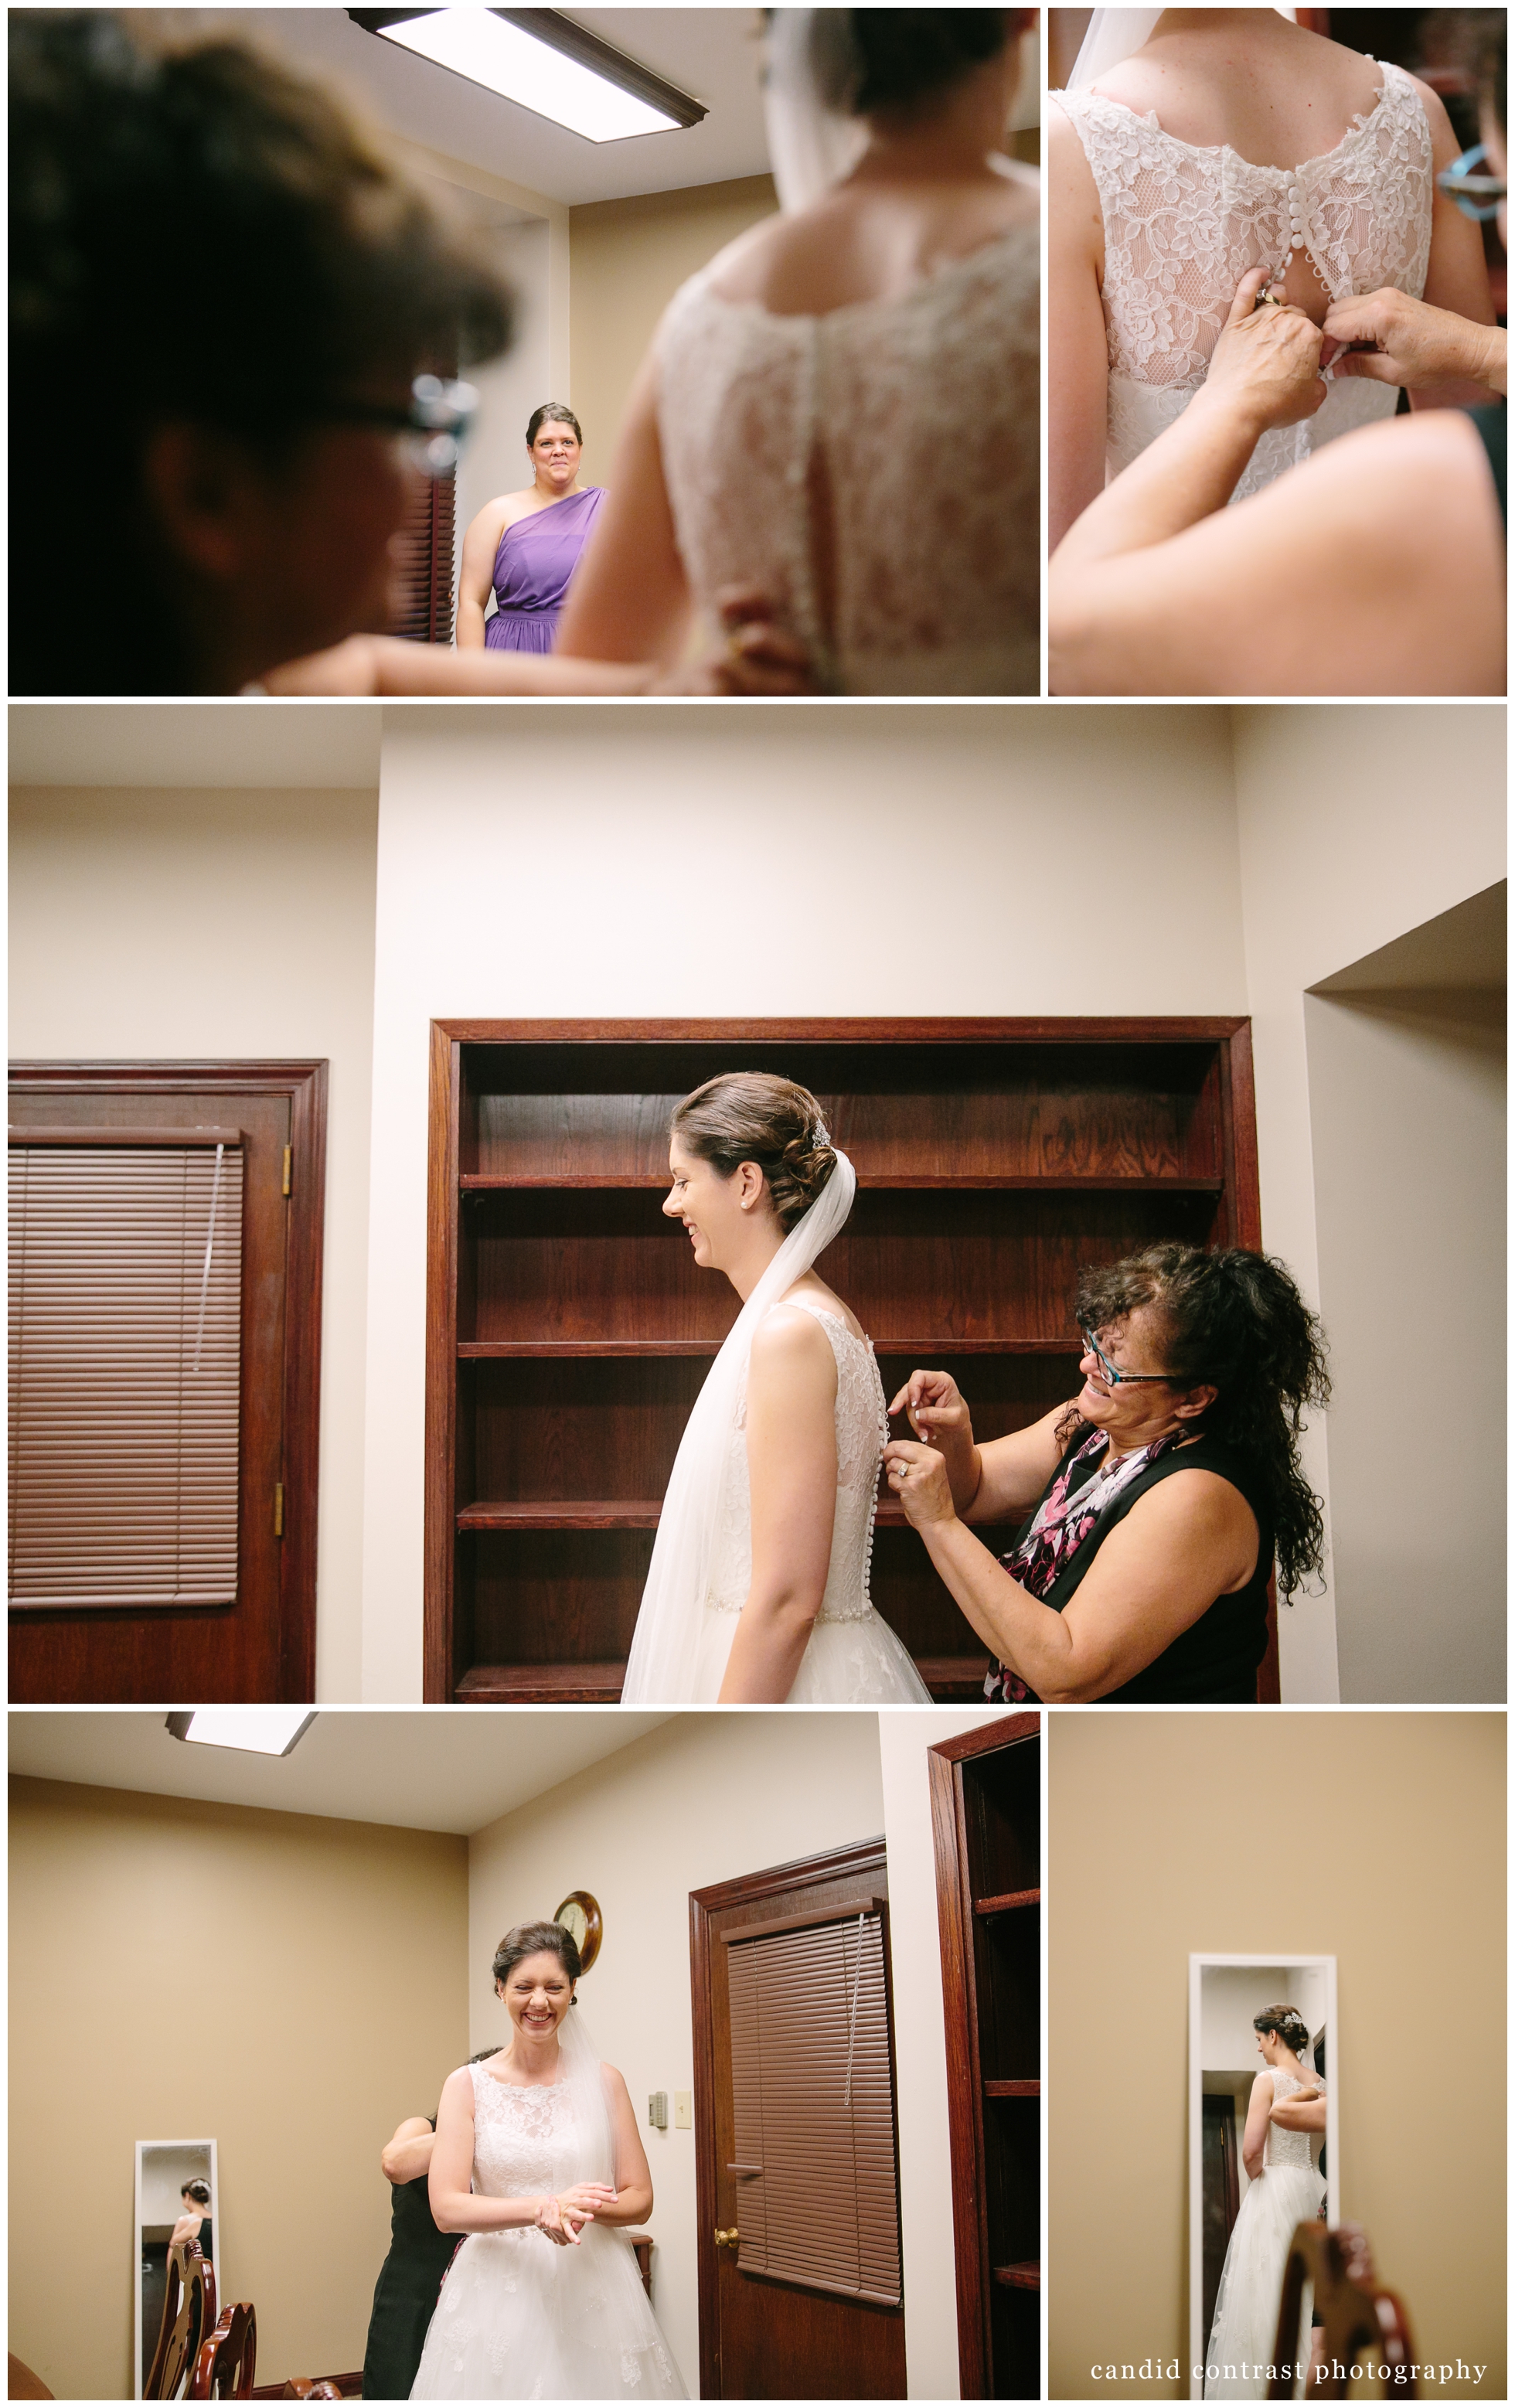 getting ready for classic Dubuque iowa wedding at the grand river center, candid contrast photography